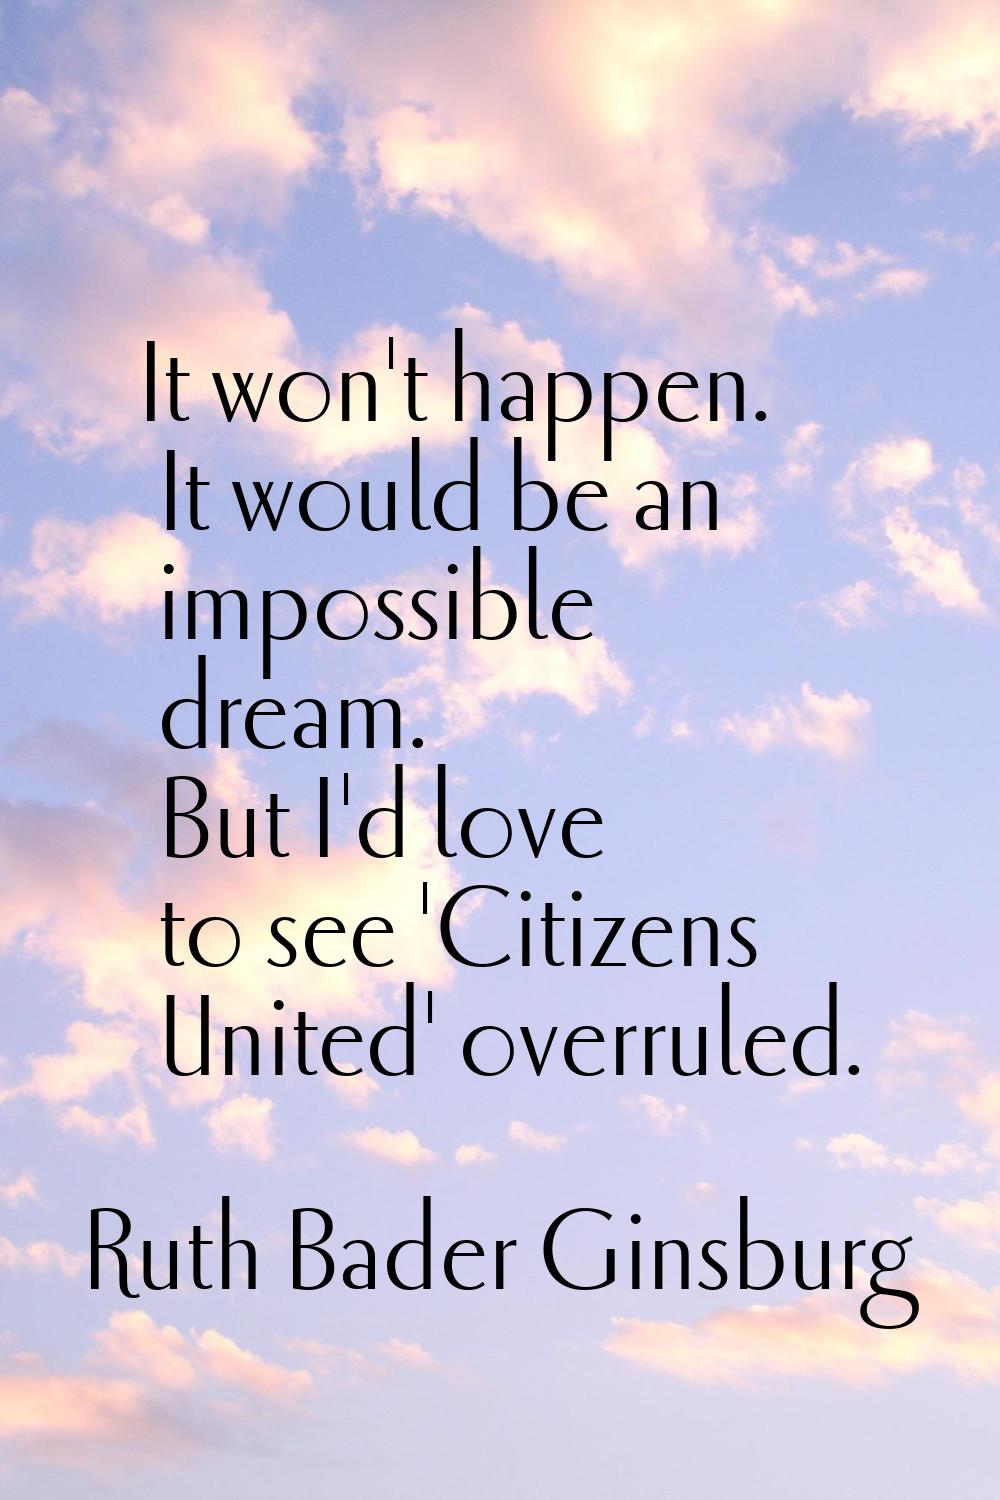 It won't happen. It would be an impossible dream. But I'd love to see 'Citizens United' overruled.